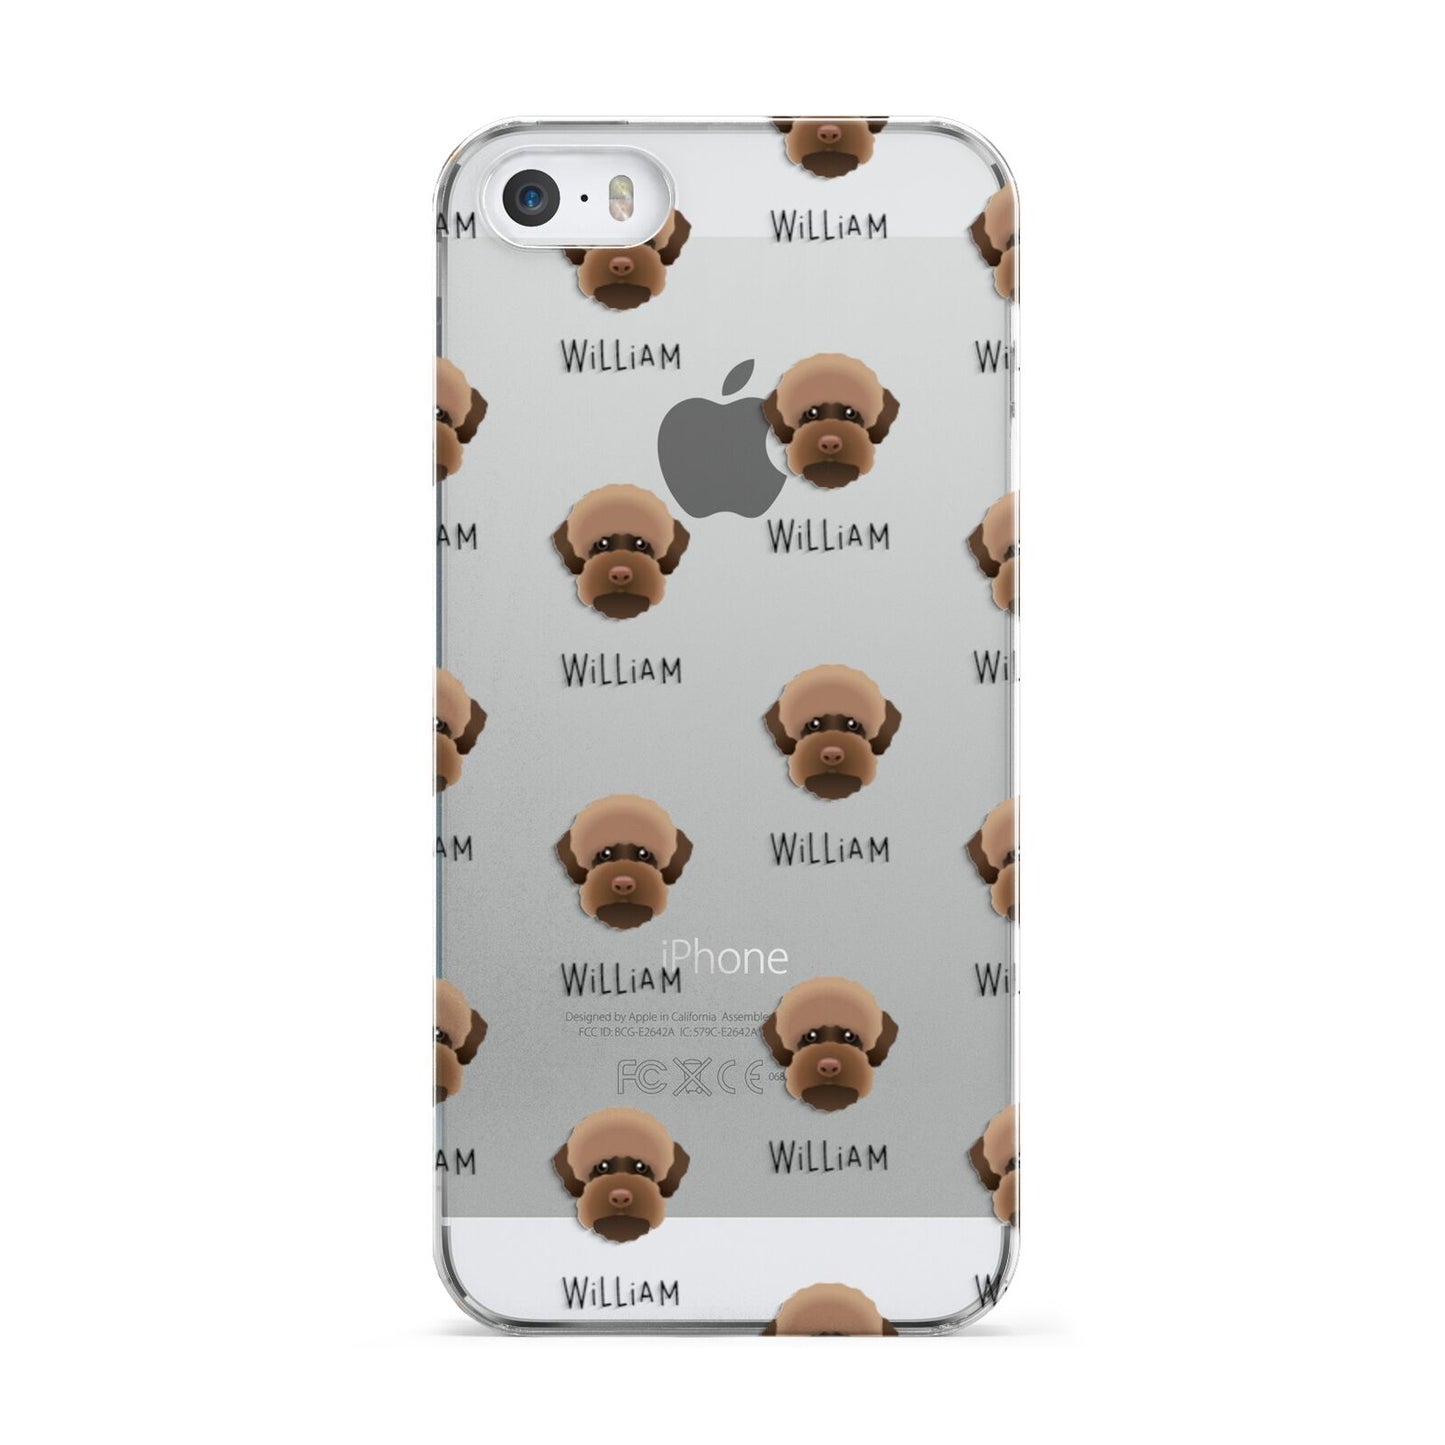 Lagotto Romagnolo Icon with Name Apple iPhone 5 Case